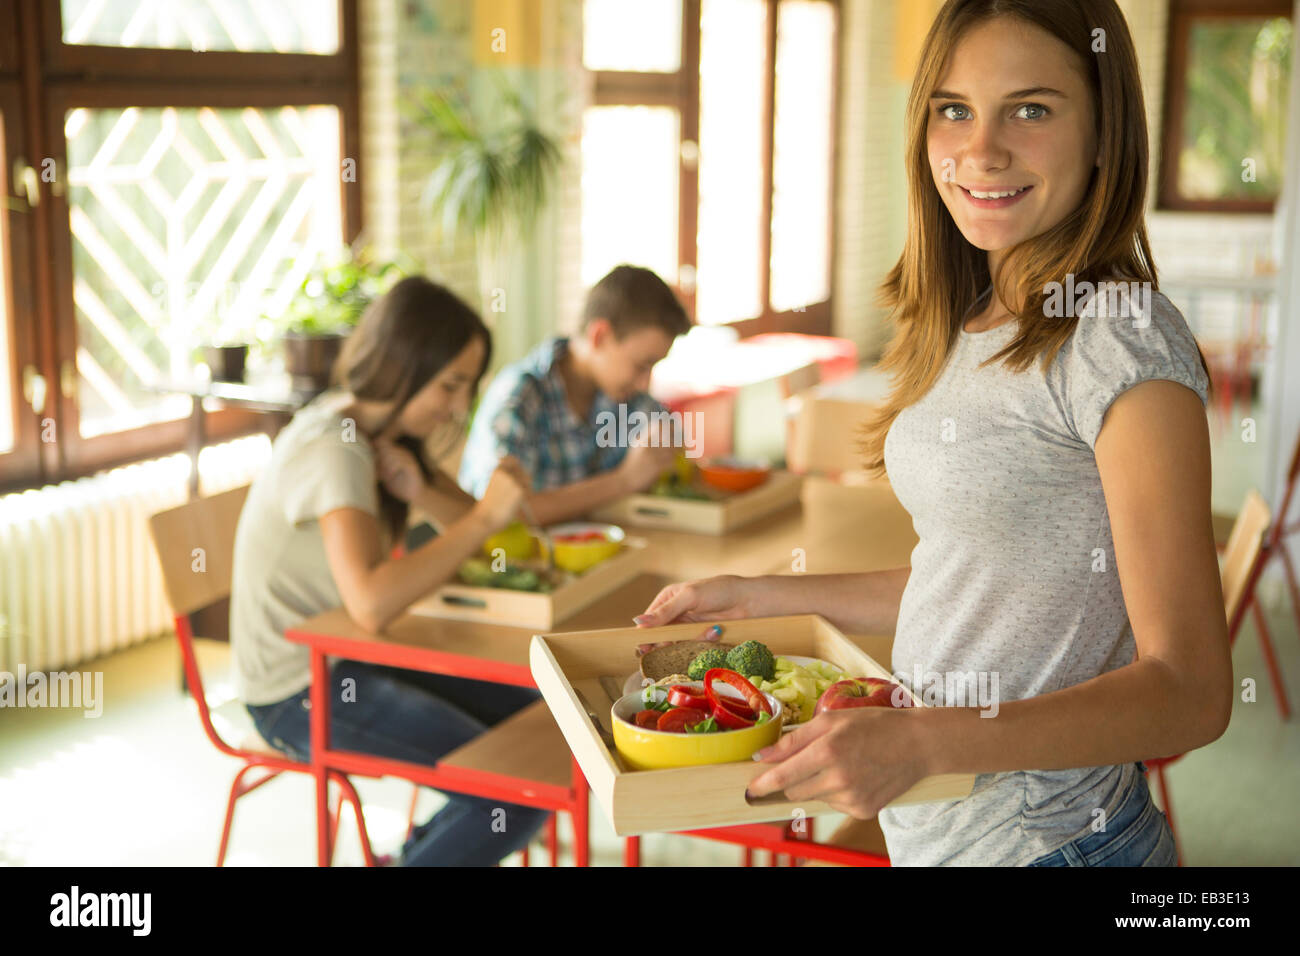 Student carrying lunch tray in school cafeteria Stock Photo